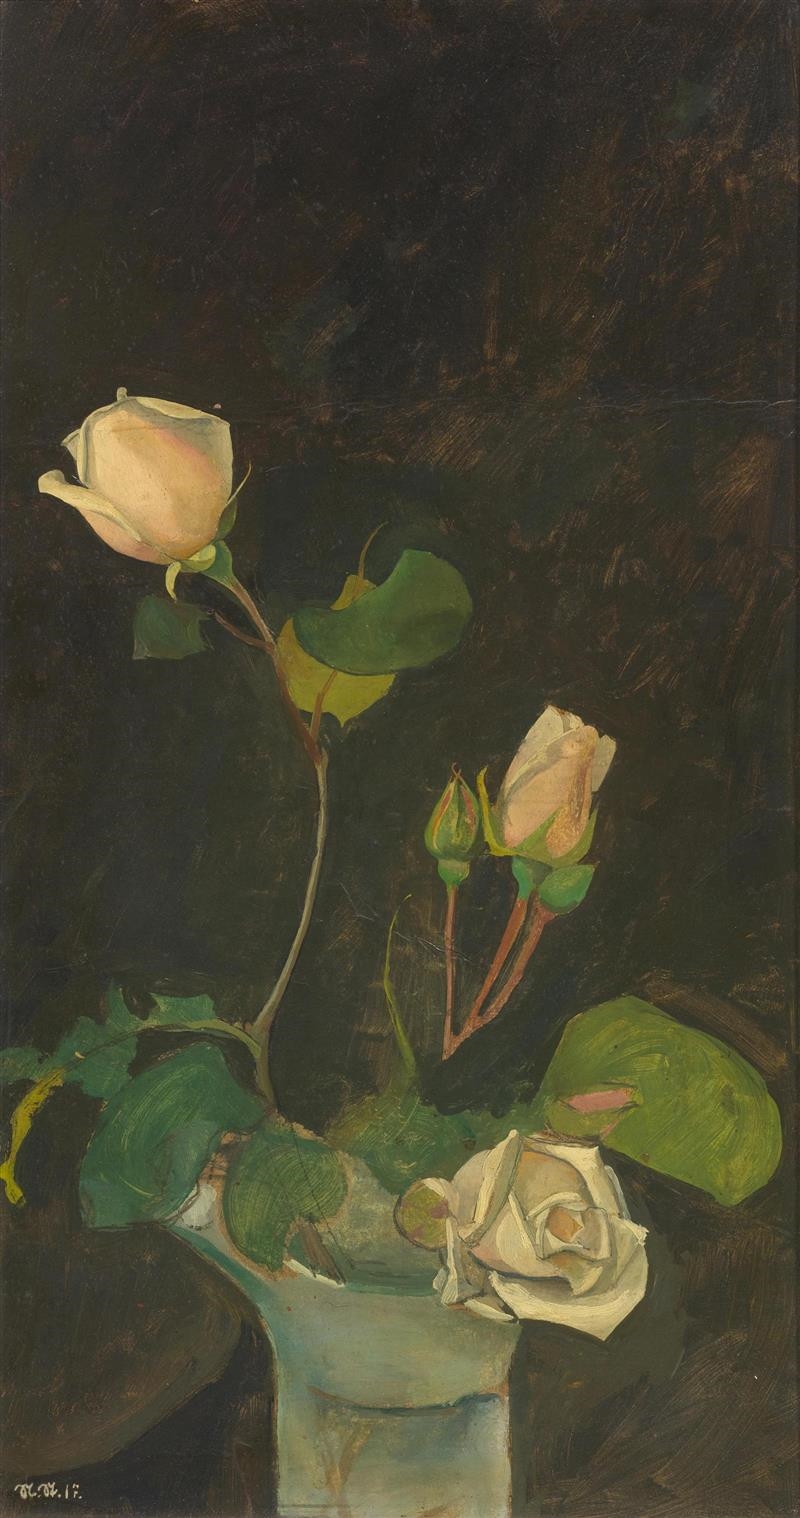 Rose in a vase by Niklaus Stoecklin, 1917